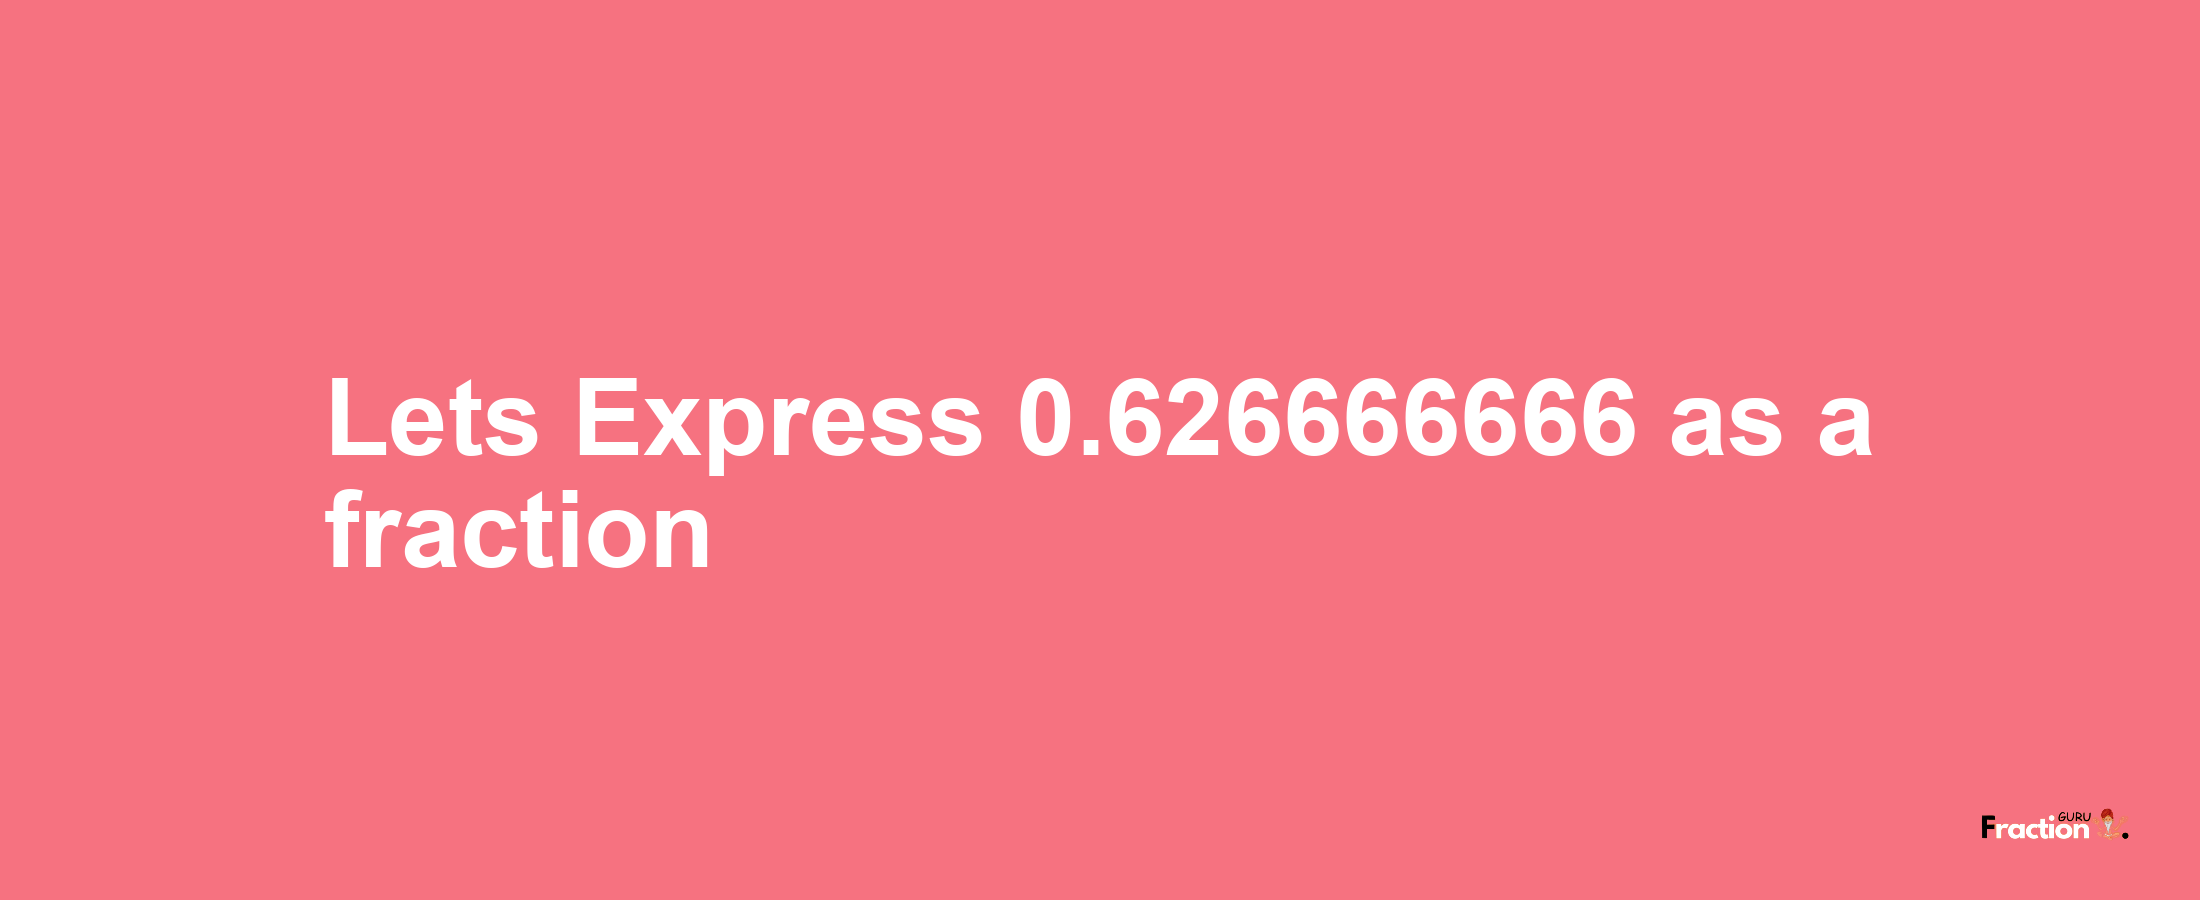 Lets Express 0.626666666 as afraction